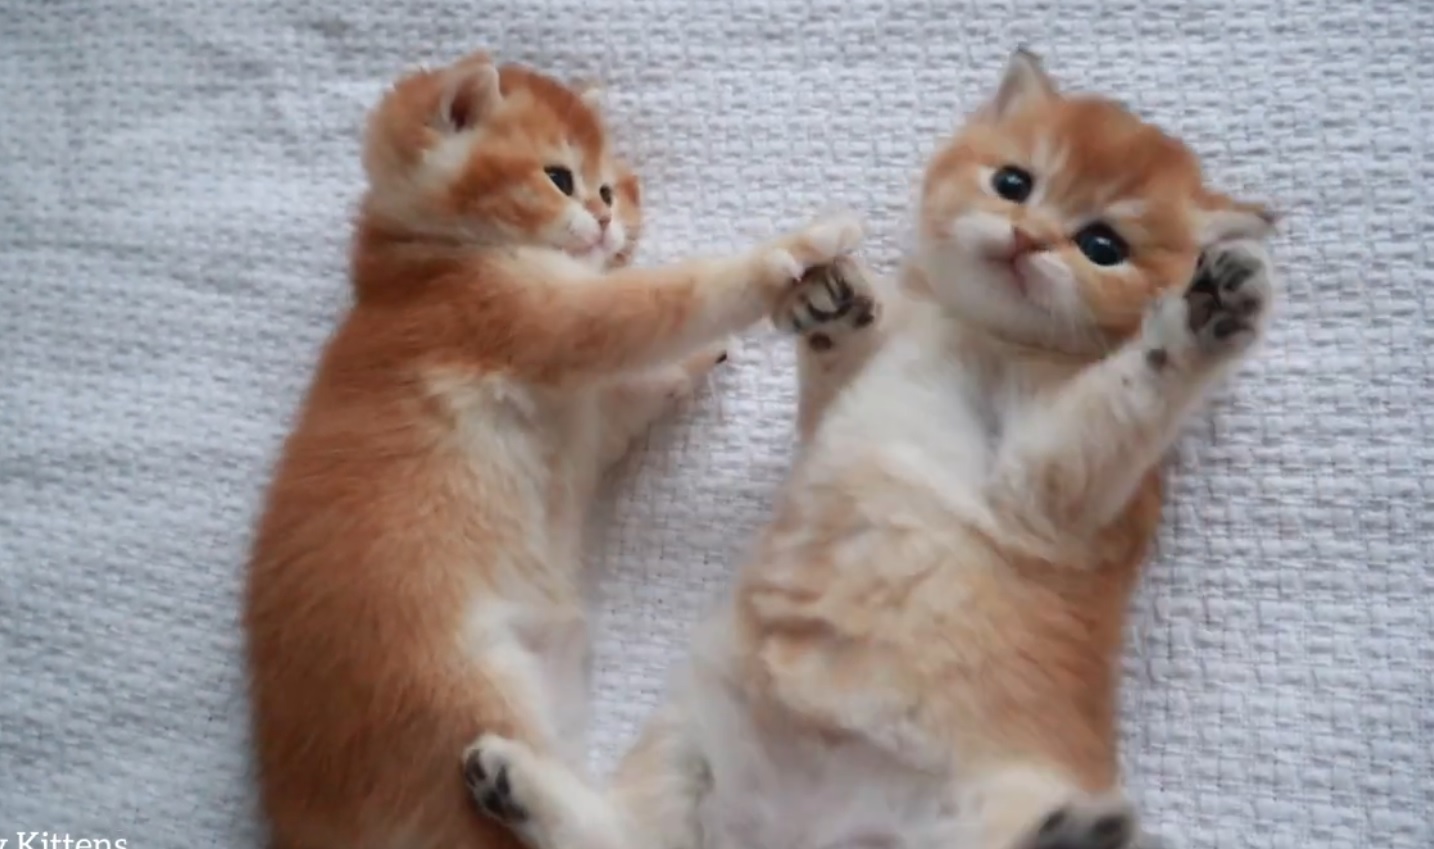 Adorable Kitttens Playing Together